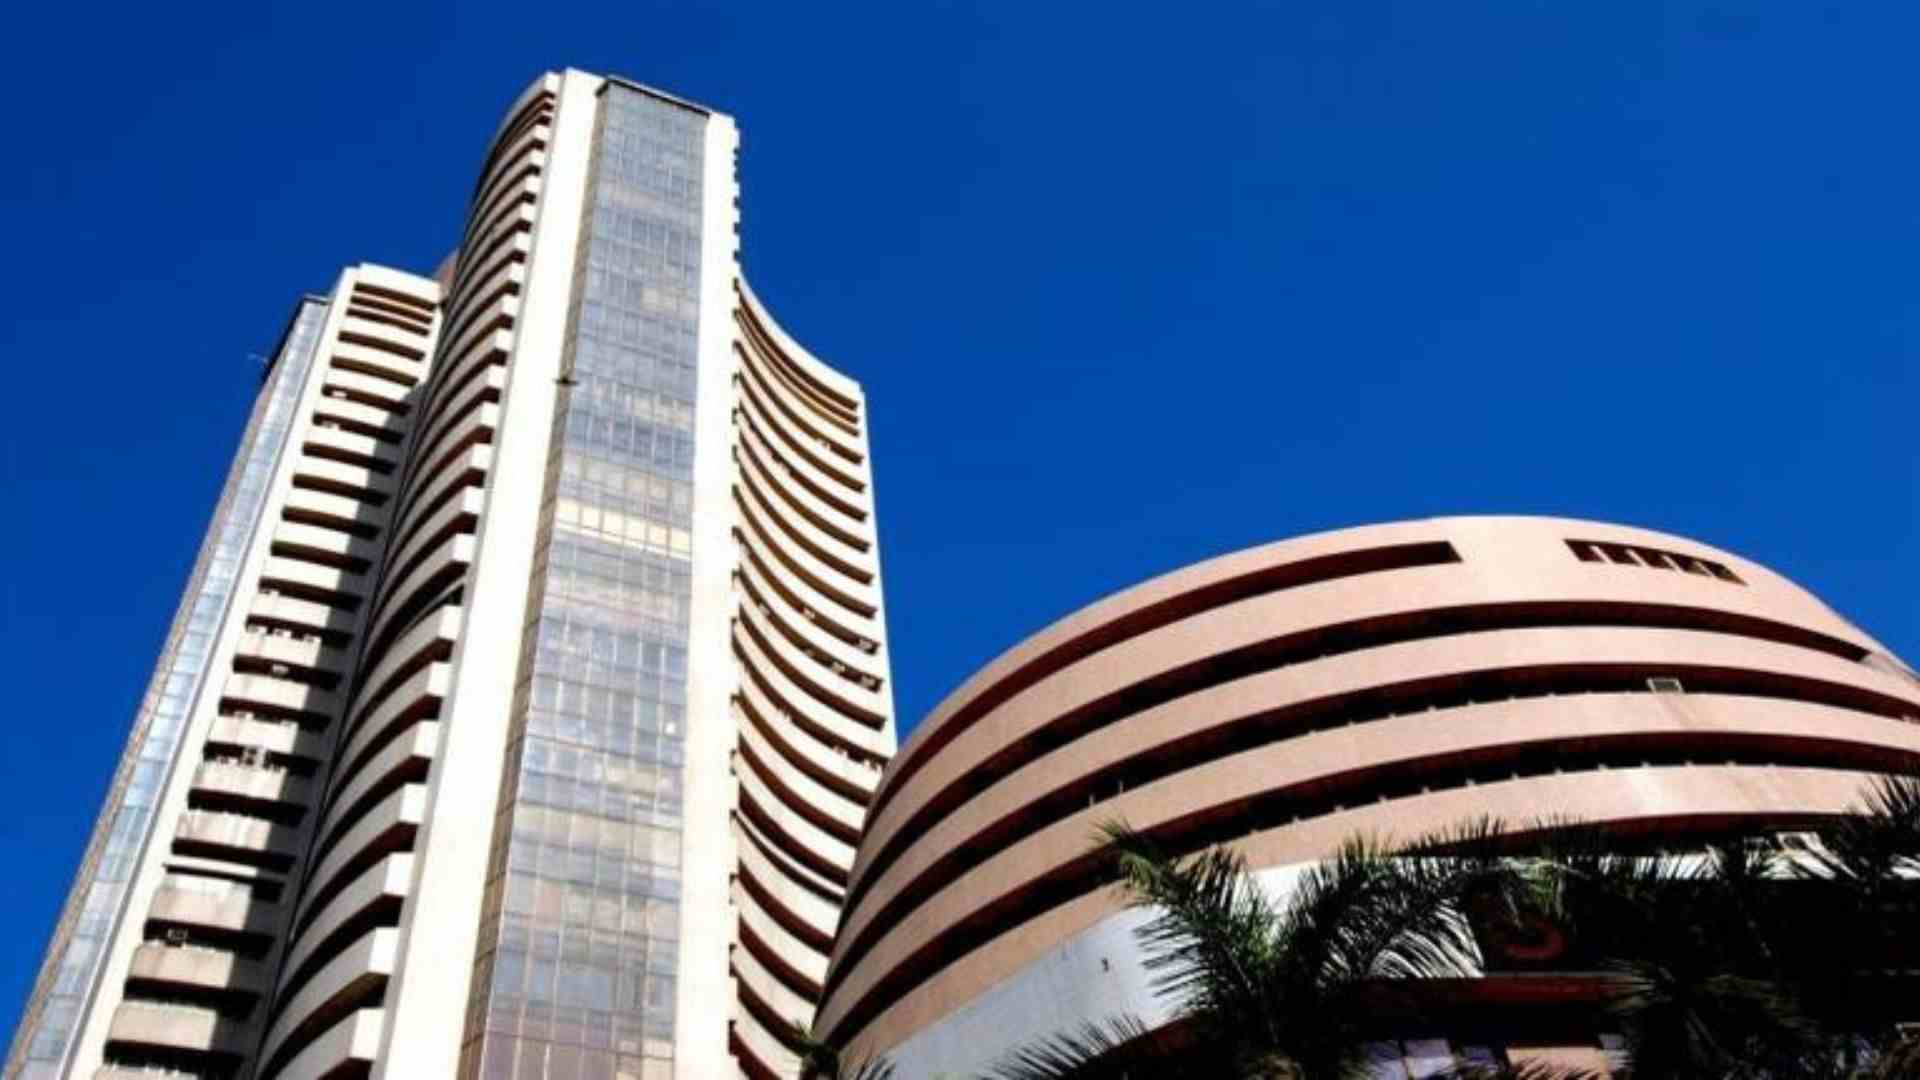 Indian Stock Markets